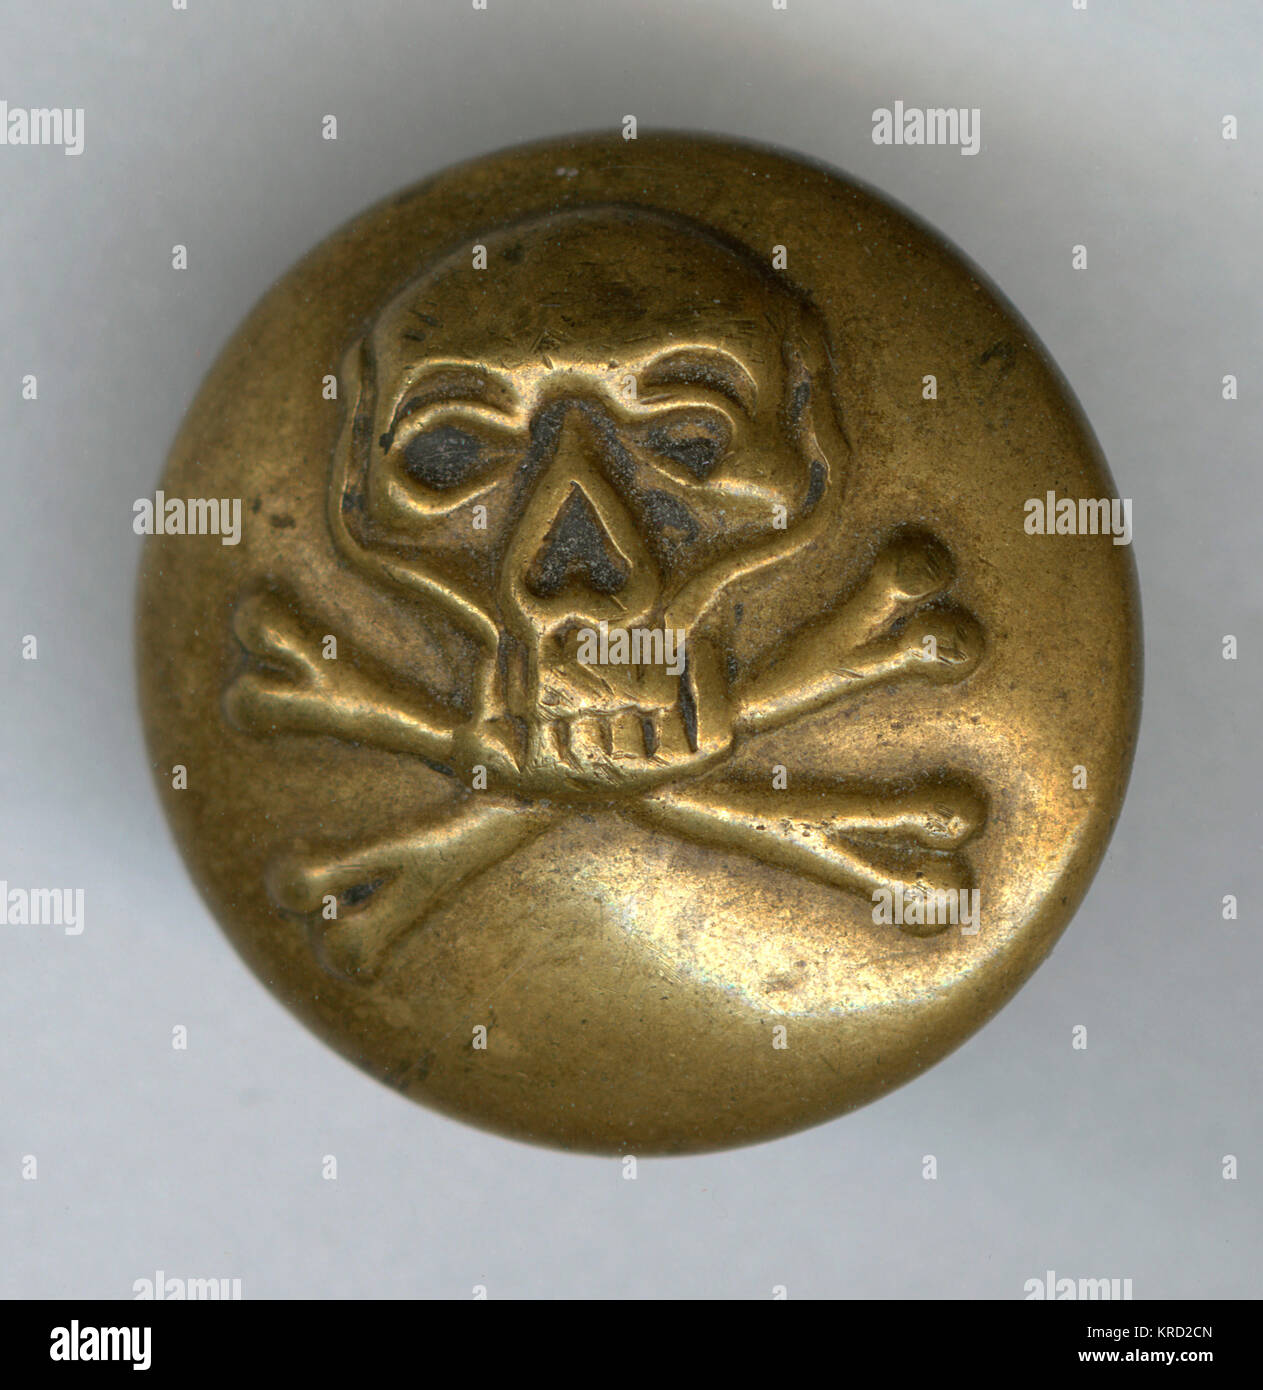 Skull and crossbones military button Stock Photo